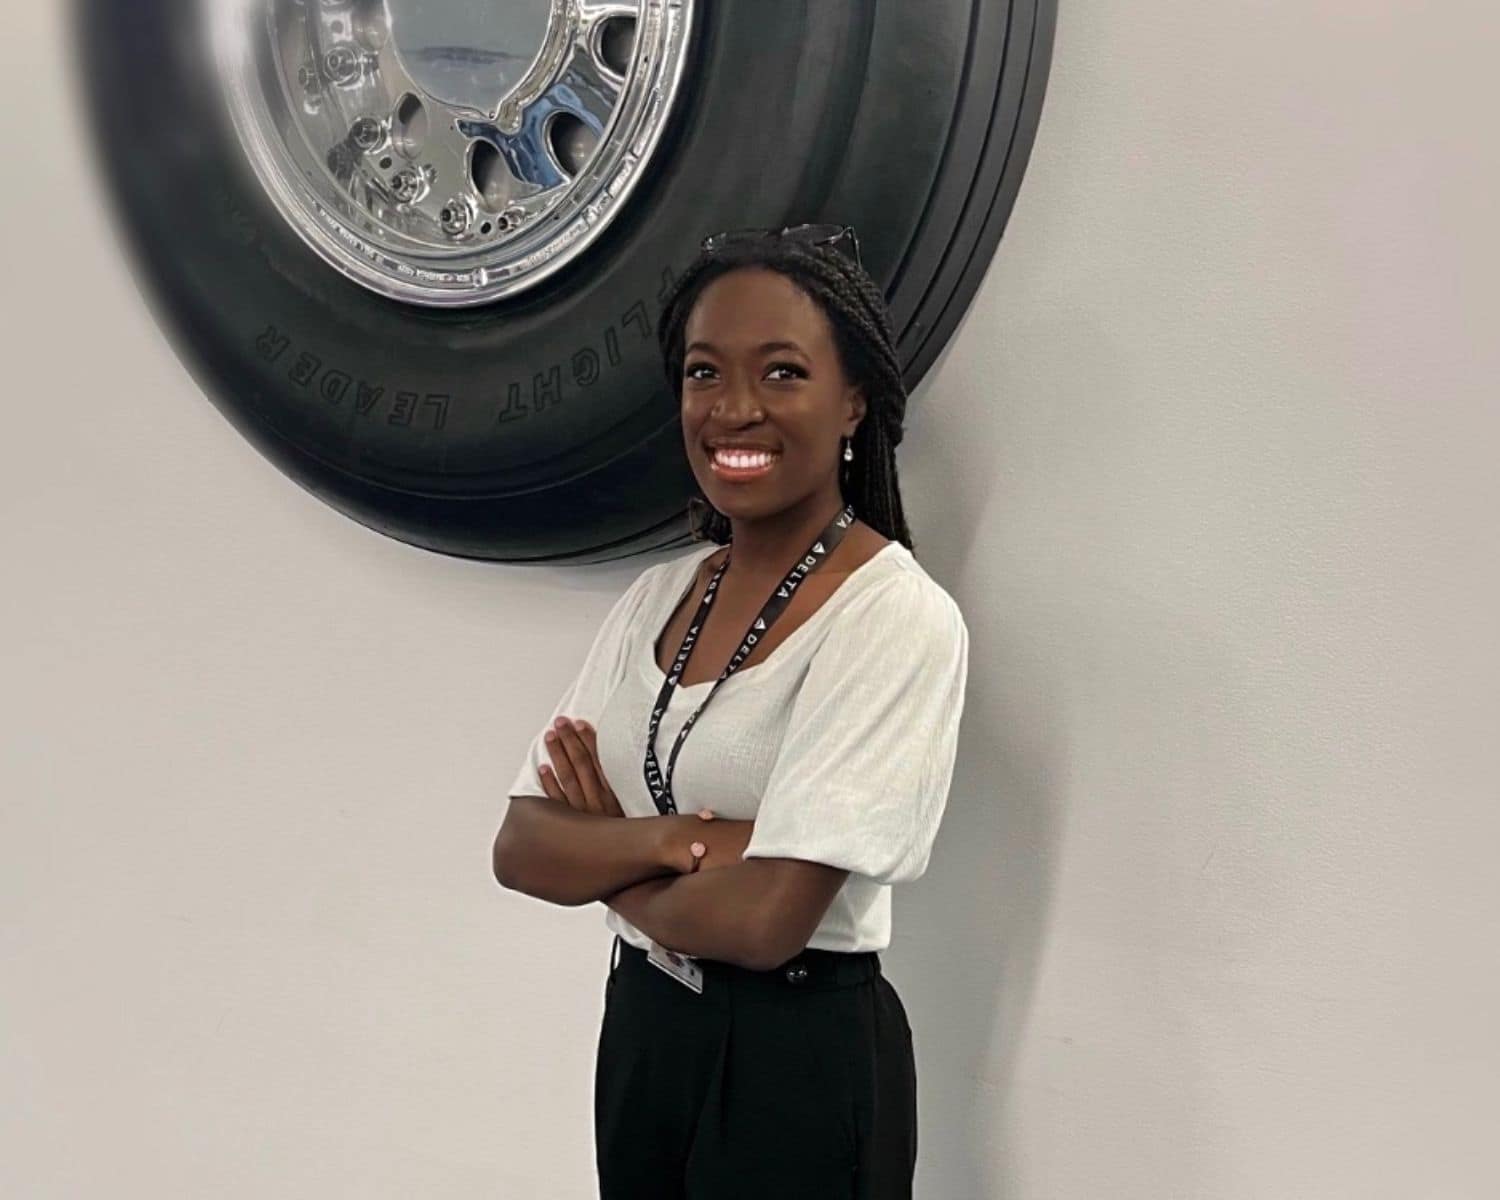 Faith Lee on her first day at Delta Air Lines, posing in front of an Airbus A320 tire. (Photo: Faith Lee / Delta Air Lines)